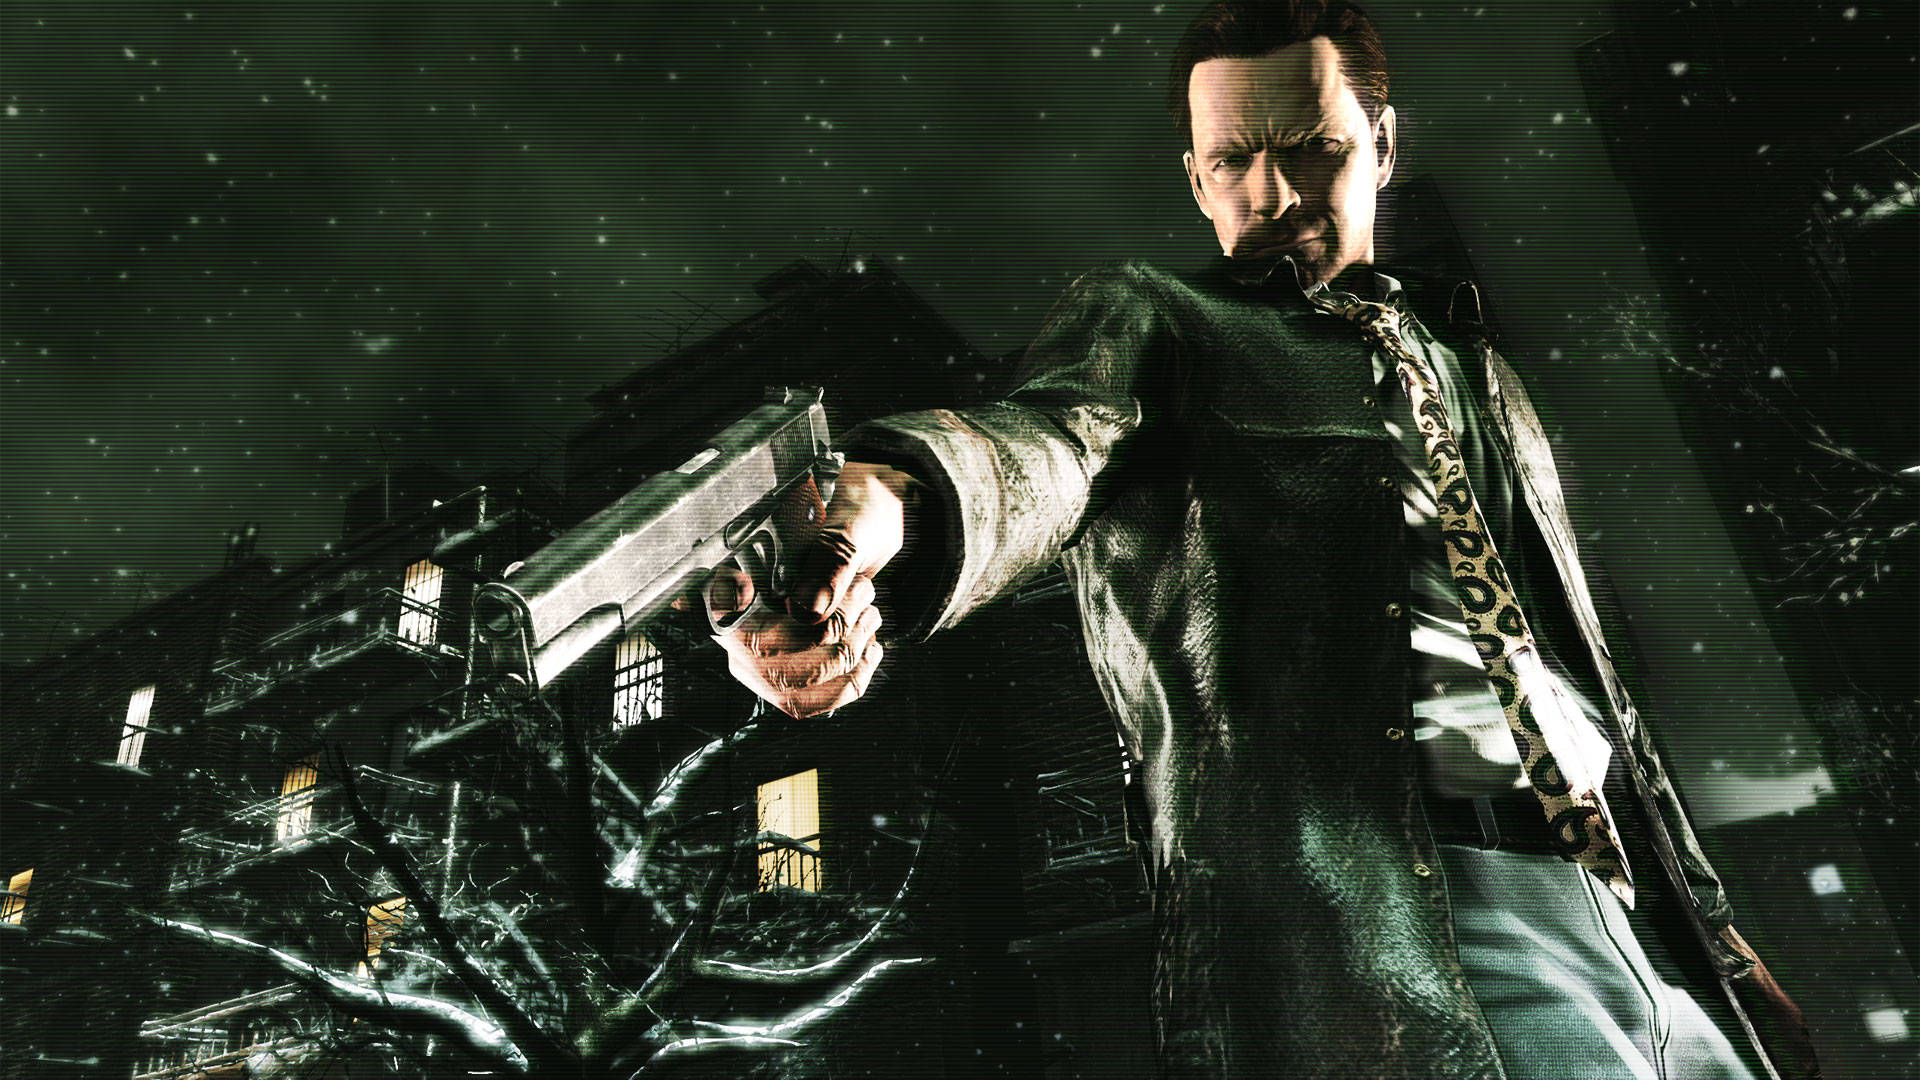 Caption: Max Payne - A furious shooter in action. Wallpaper